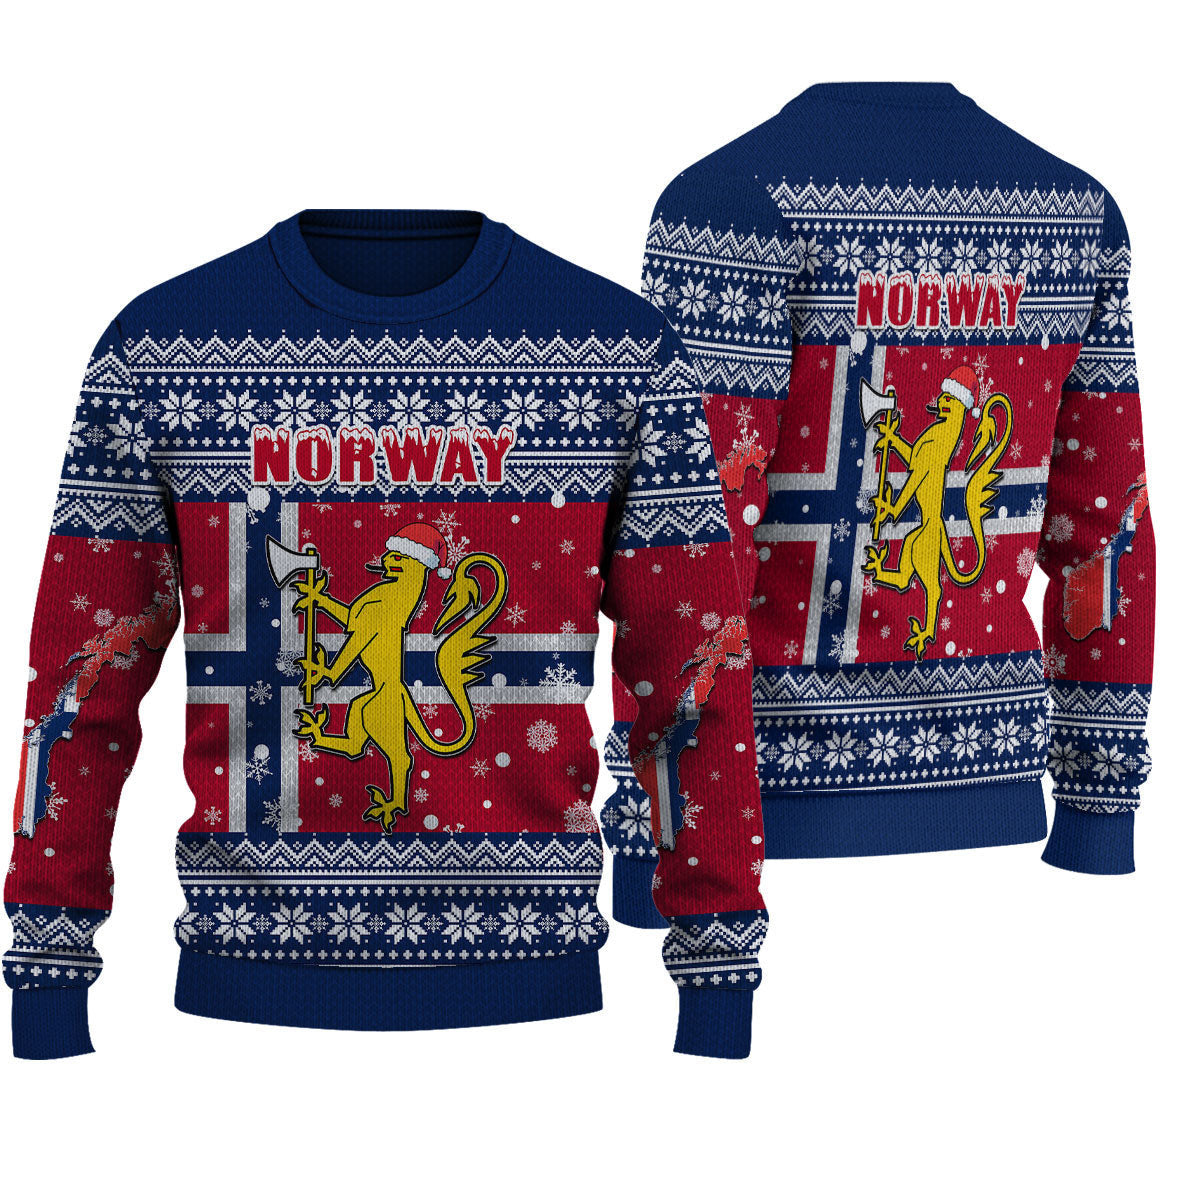 wonder-print-shop-ugly-sweater-norway-christmas-knitted-sweater